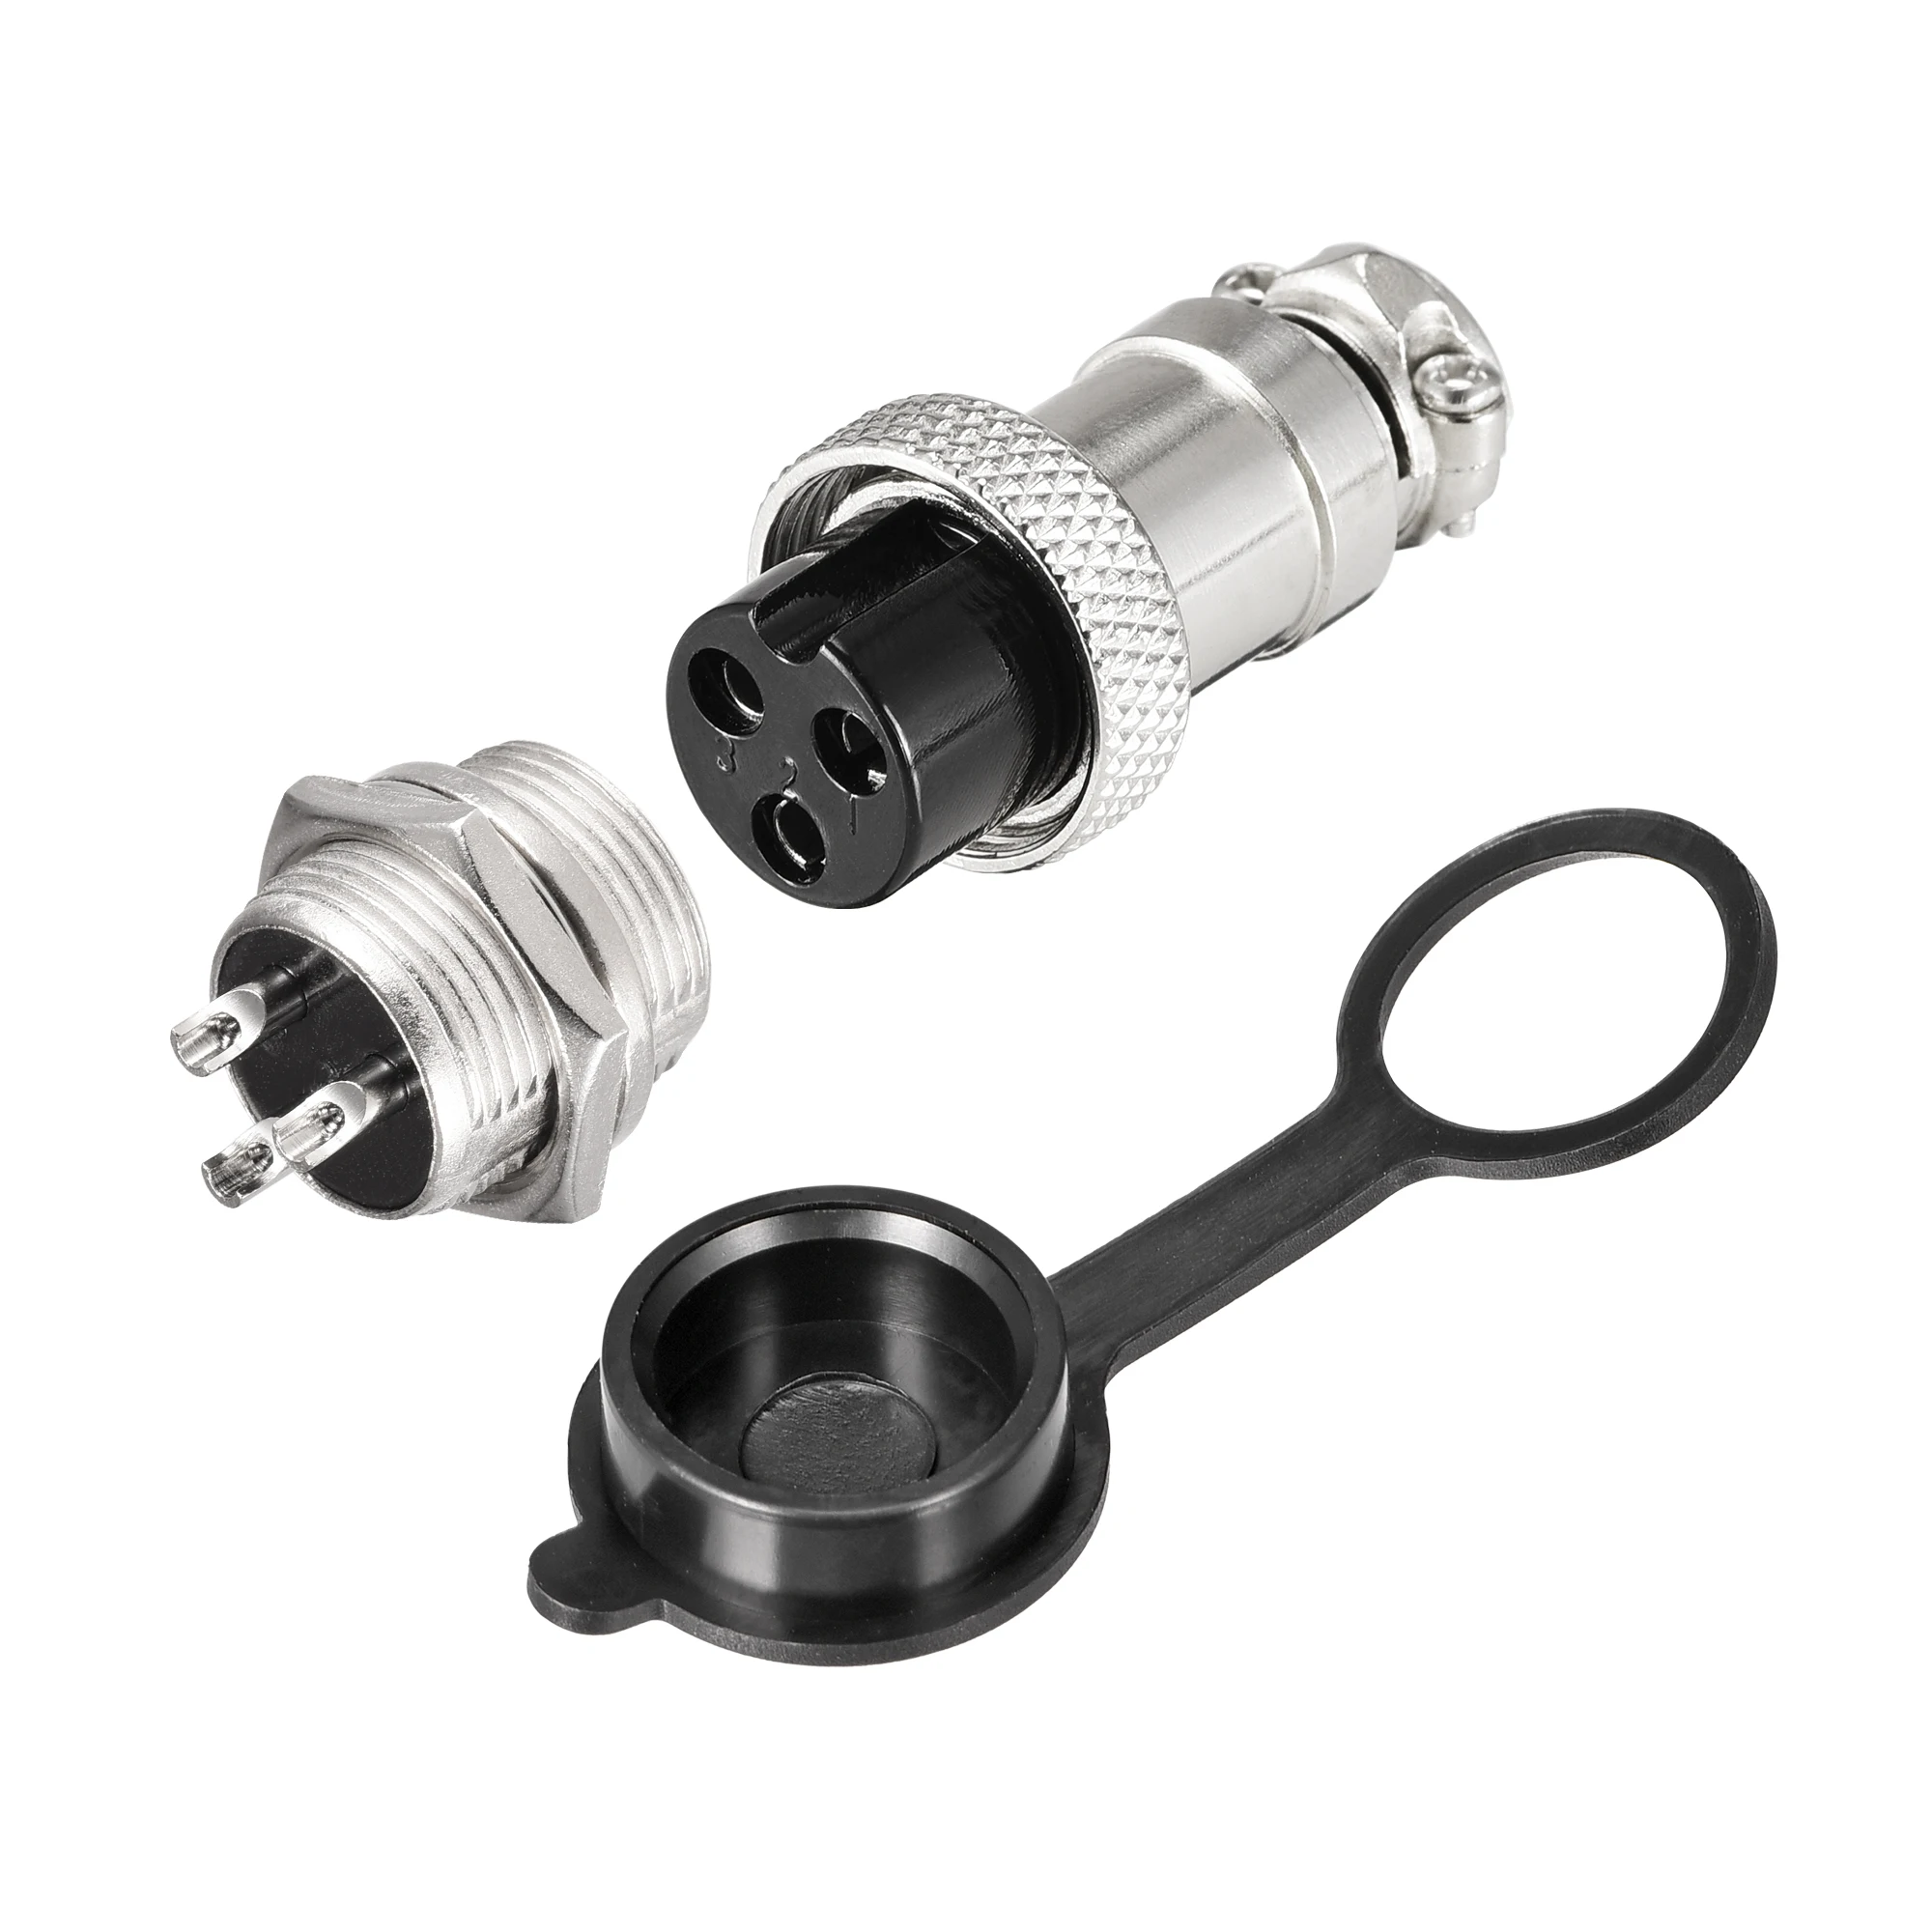 

10Sets GX16 16mm 3 Terminals 7A 400V Aviation Connector Waterproof Dust Cap Male Female Panel Connector Fittings with Plug Cover